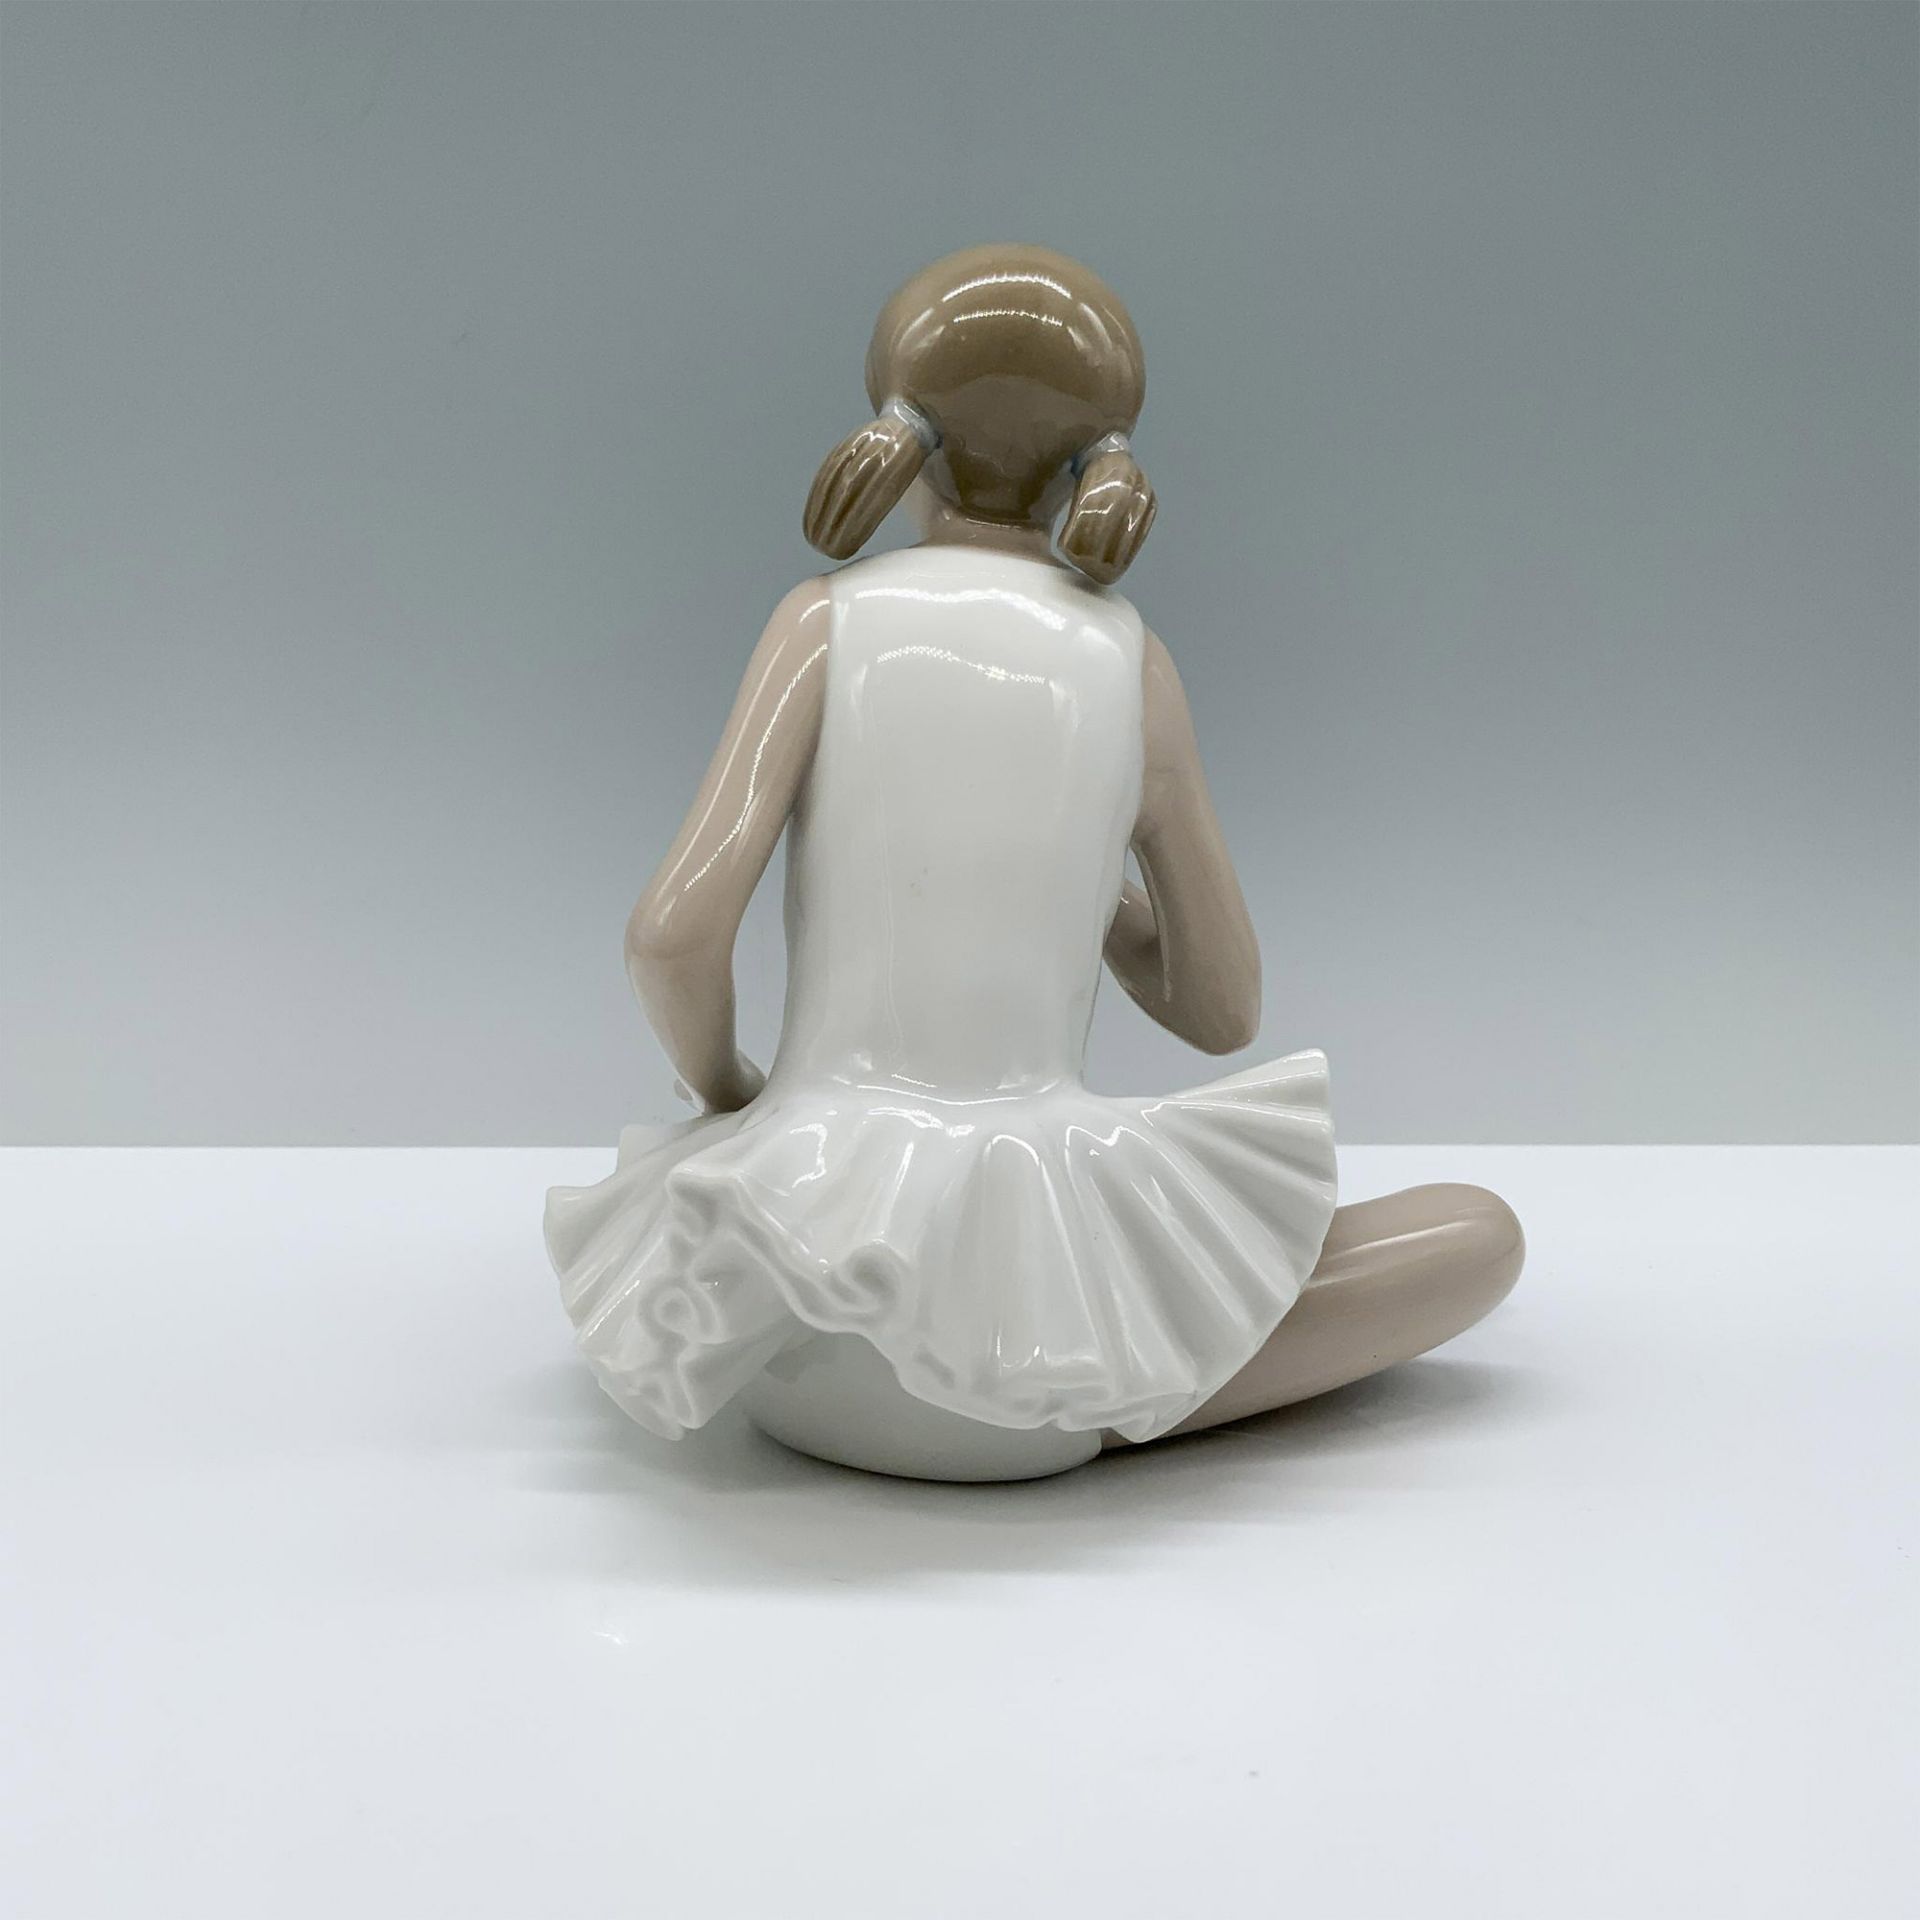 Nao by Lladro Figurine, Attentive Ballet 2010146 - Image 2 of 3